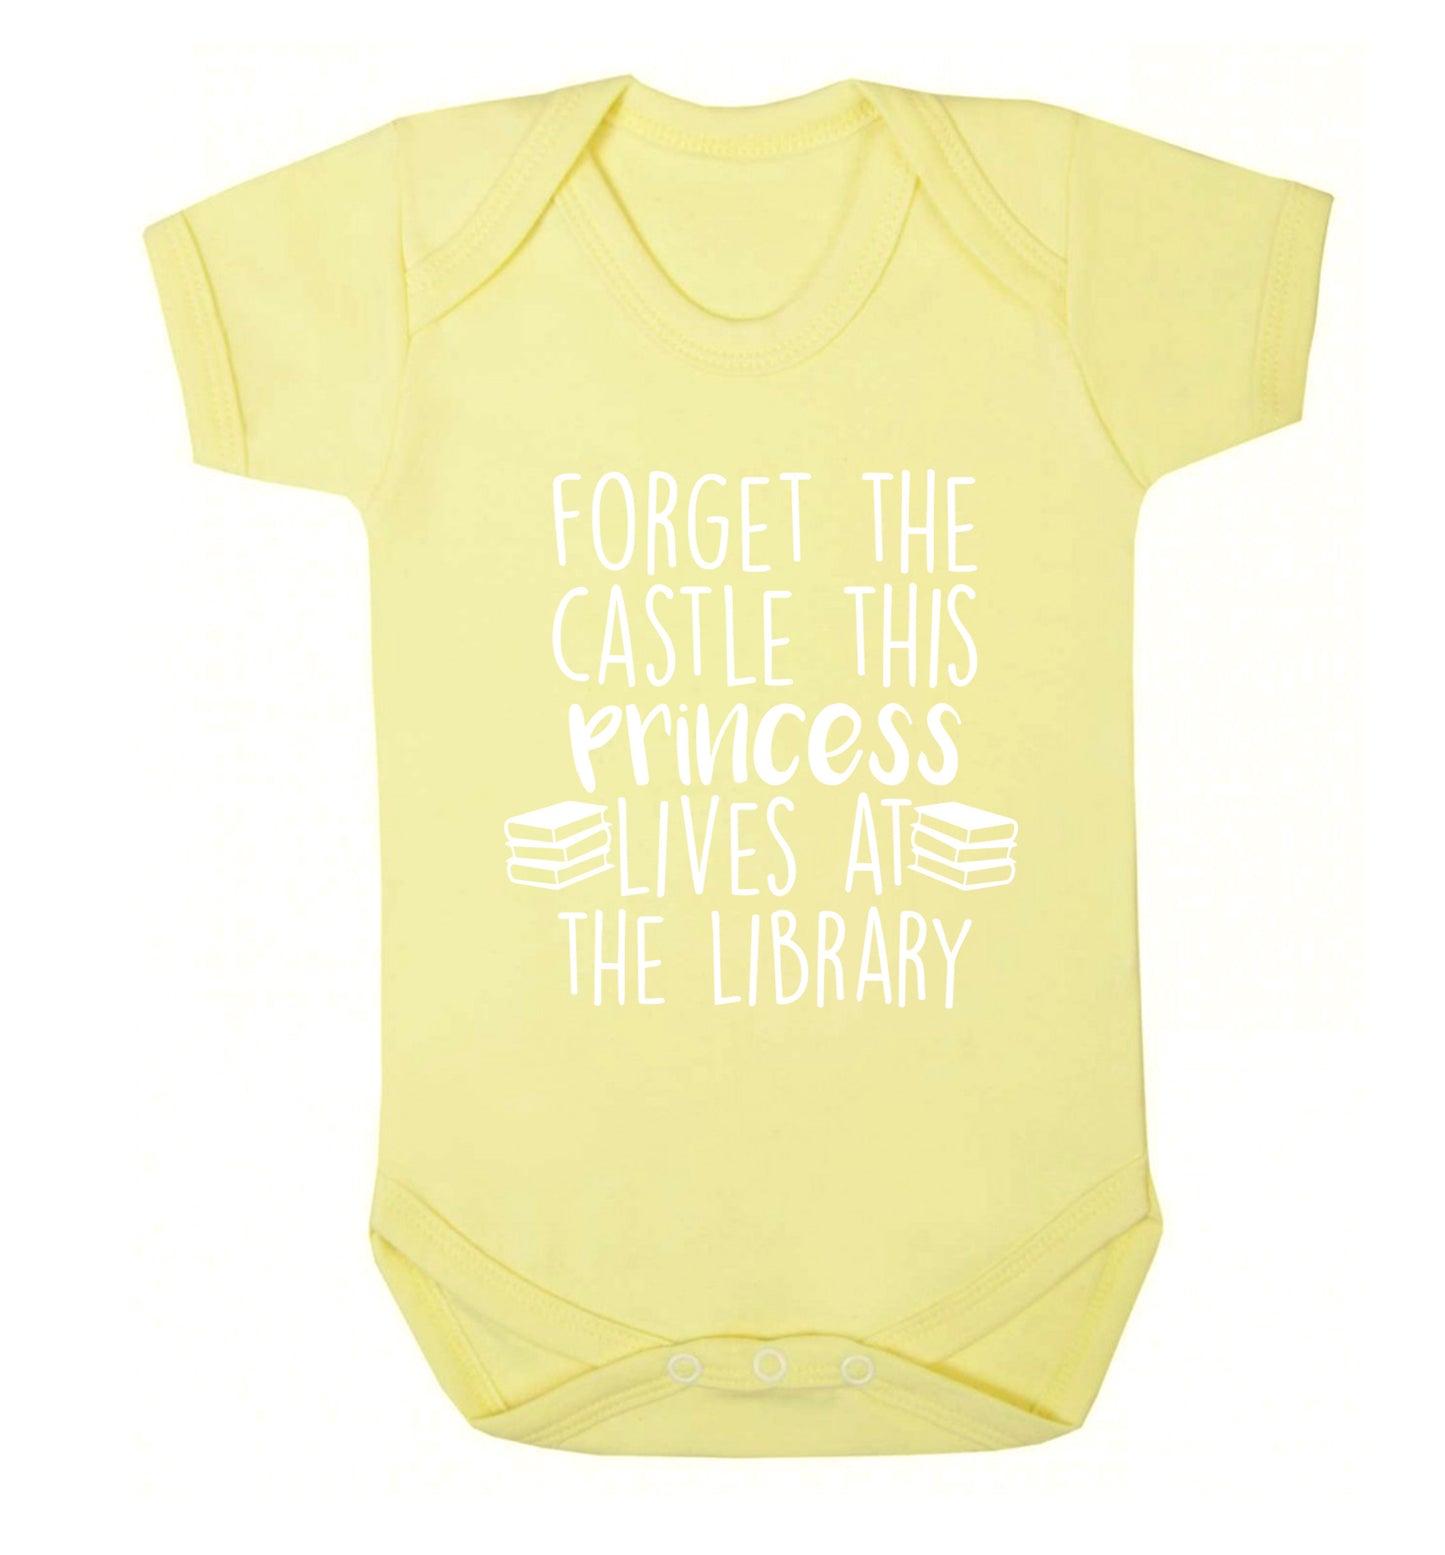 Forget the castle this princess lives at the library Baby Vest pale yellow 18-24 months